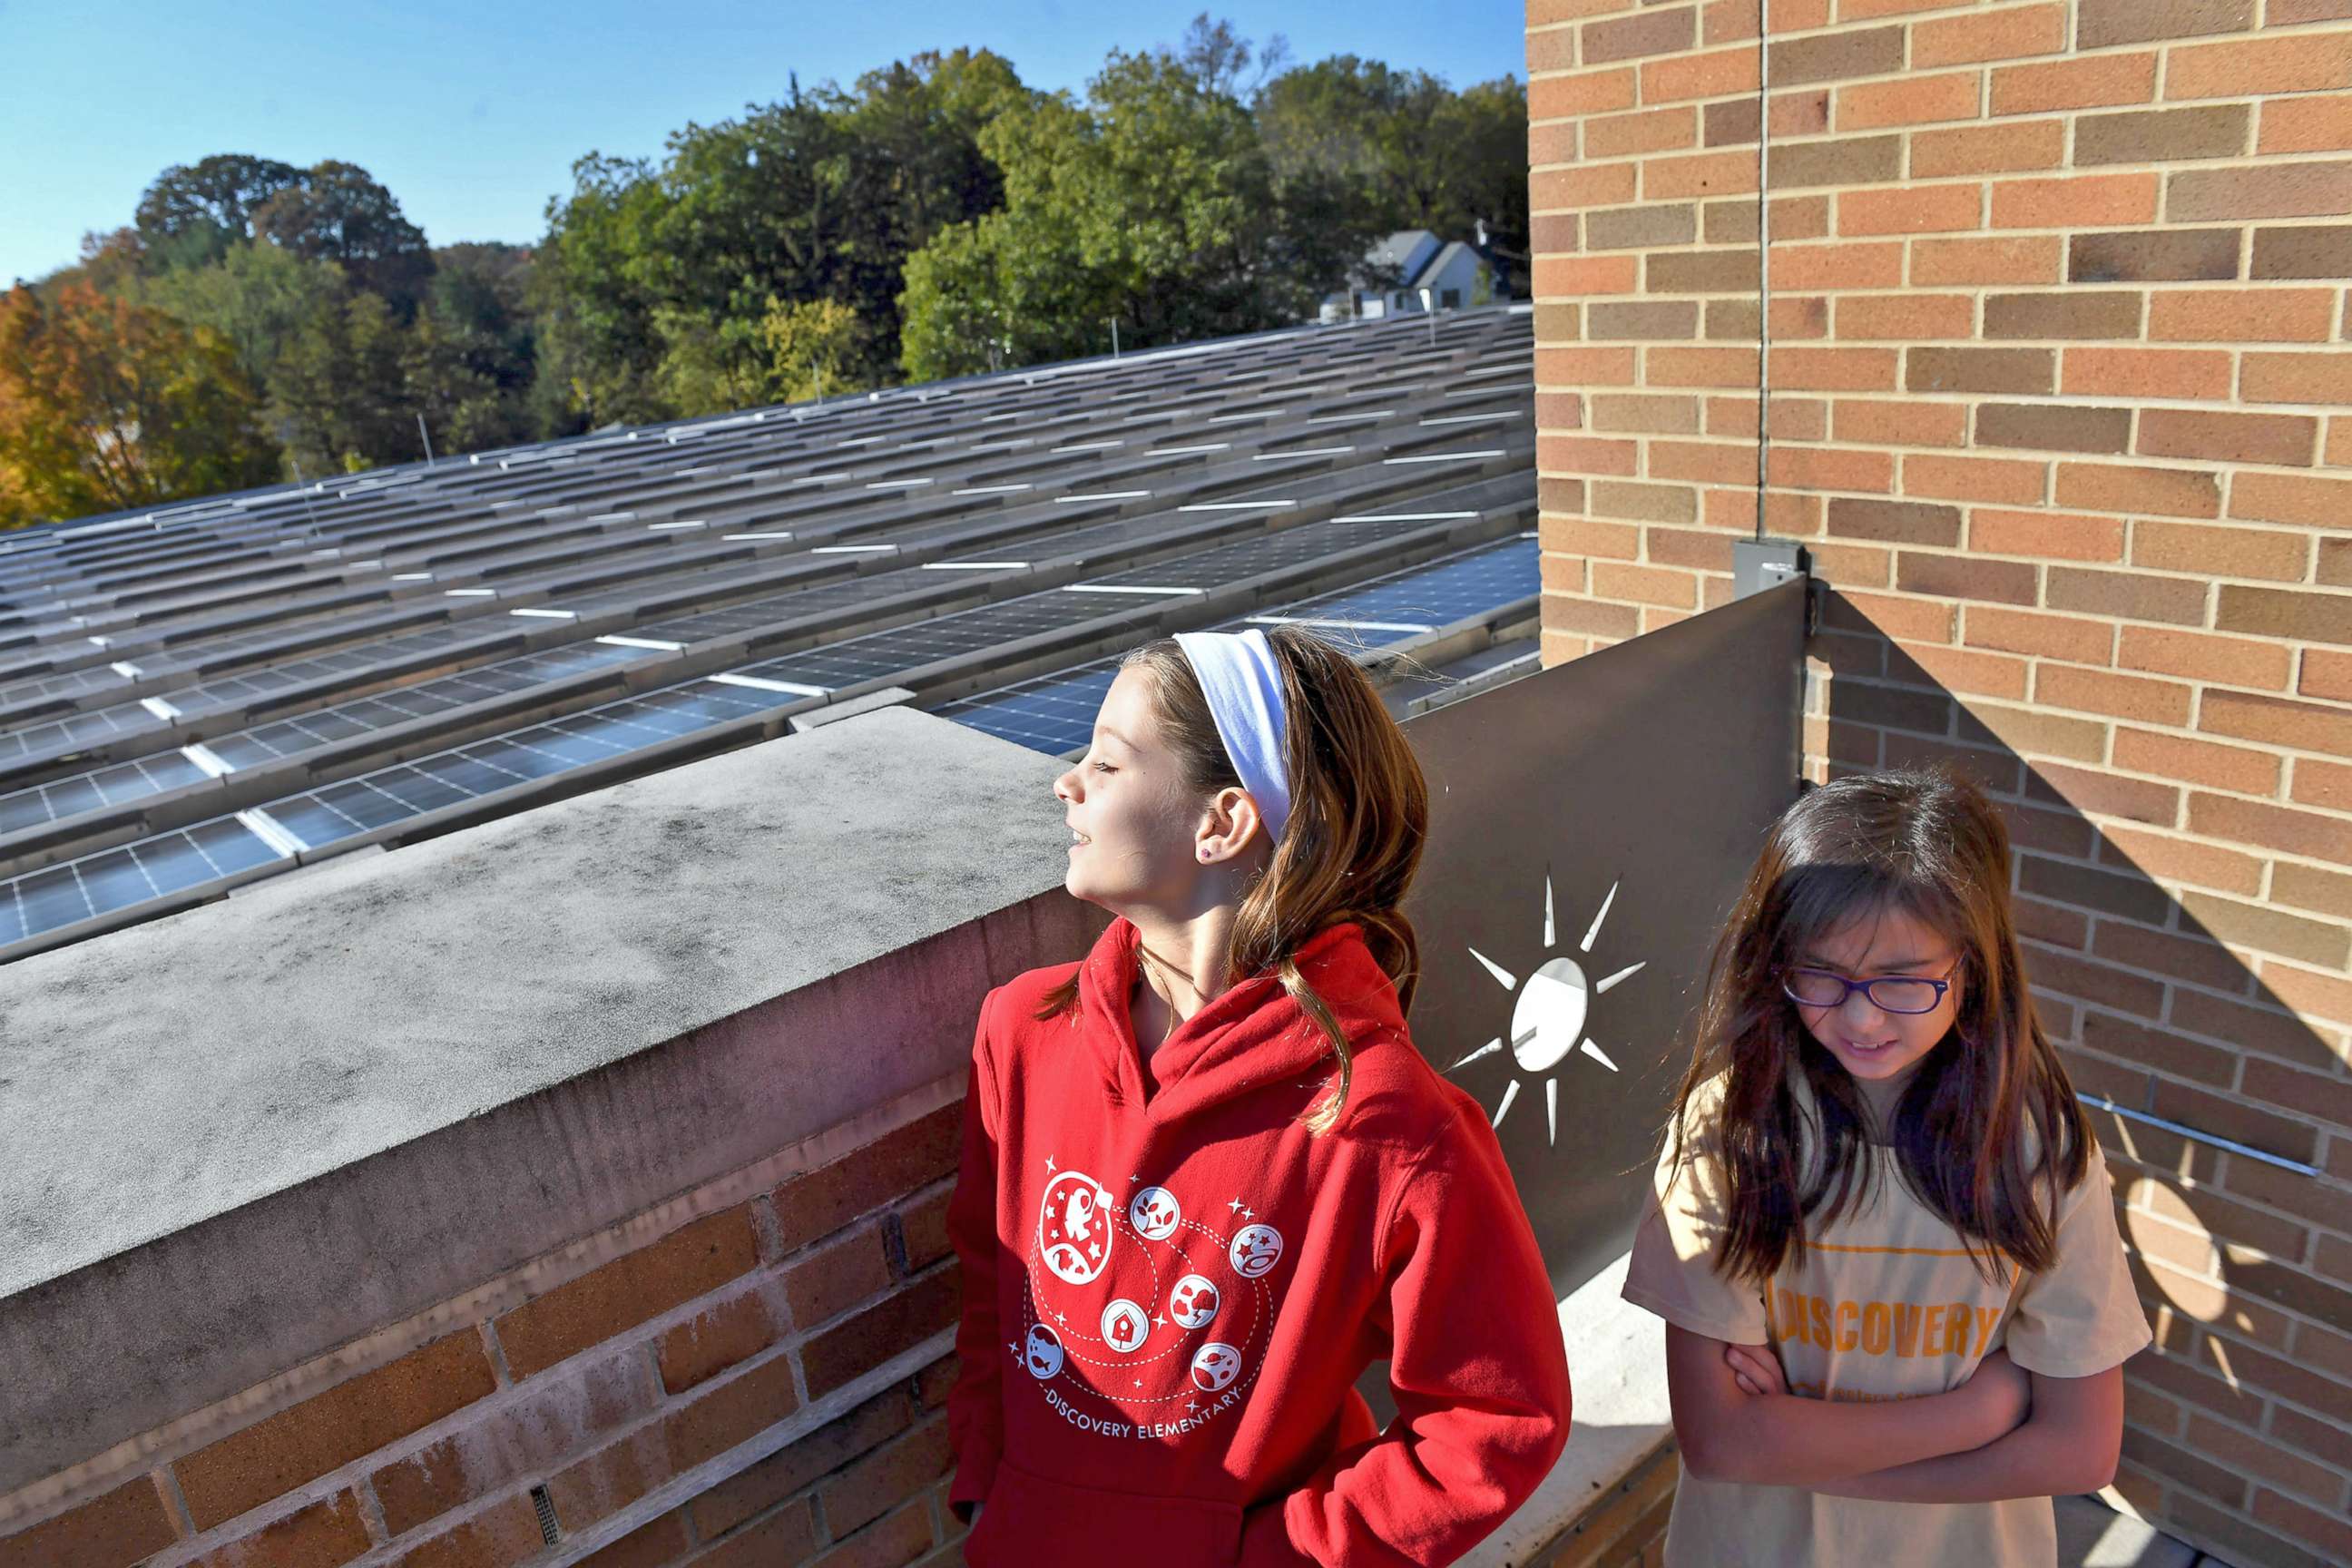 PHOTO: Students give a tour of an area with solar panels at Discovery Elementary School on Nov. 4, 2019 in Arlington, Va. The energy efficient school teaches students about renewable energy, waste recycling and other responsible environmental approaches.